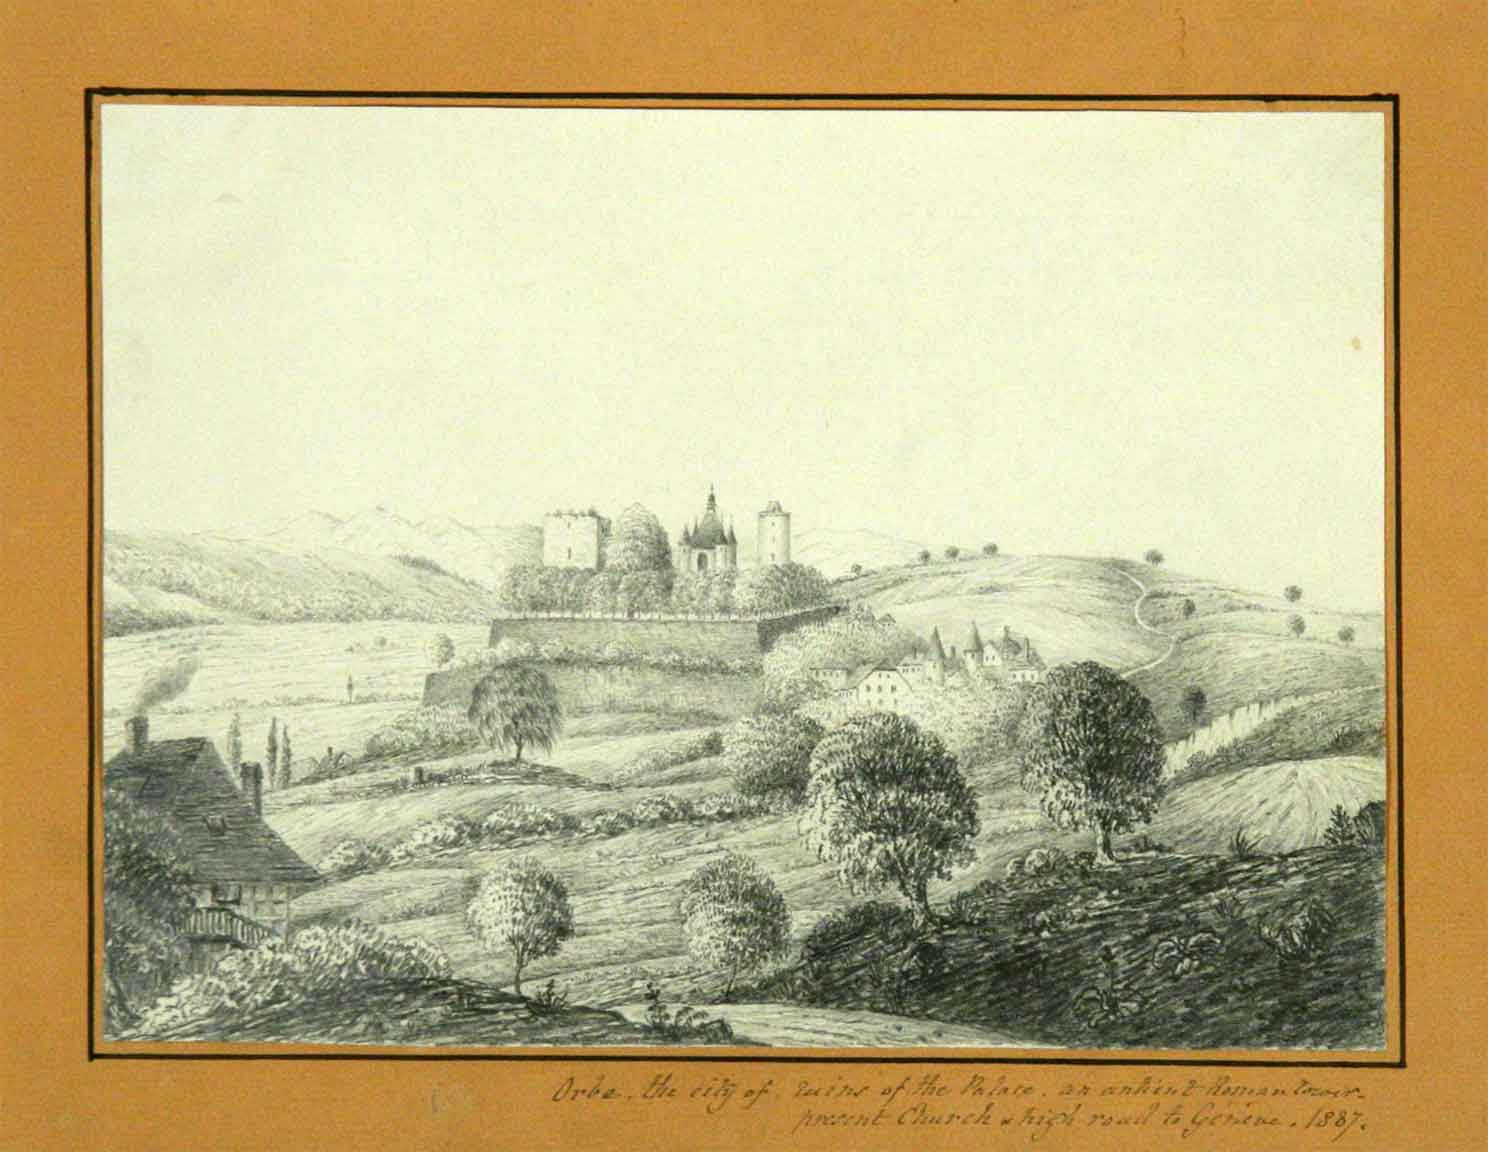  - Vue d'Orbe avec texte ms. sous l'image: 'Orbe the City of ruins of the Palace an ancient Roman teroir present Church & high road to Genva 1837',  dessin  avec texte ms.